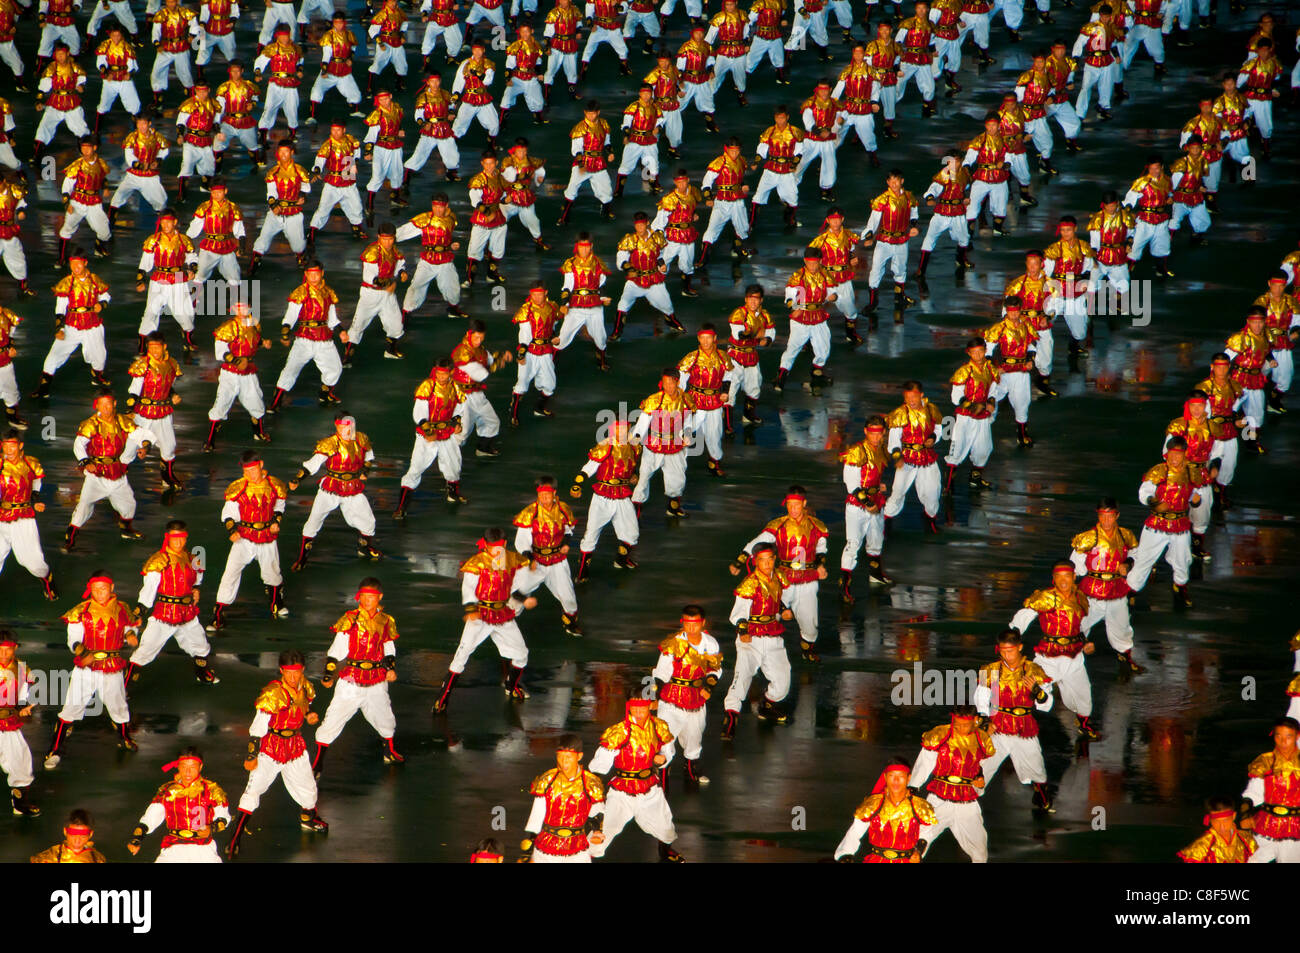 Dancers at the Airand festival, Mass games in Pyongyang, North Korea Stock Photo